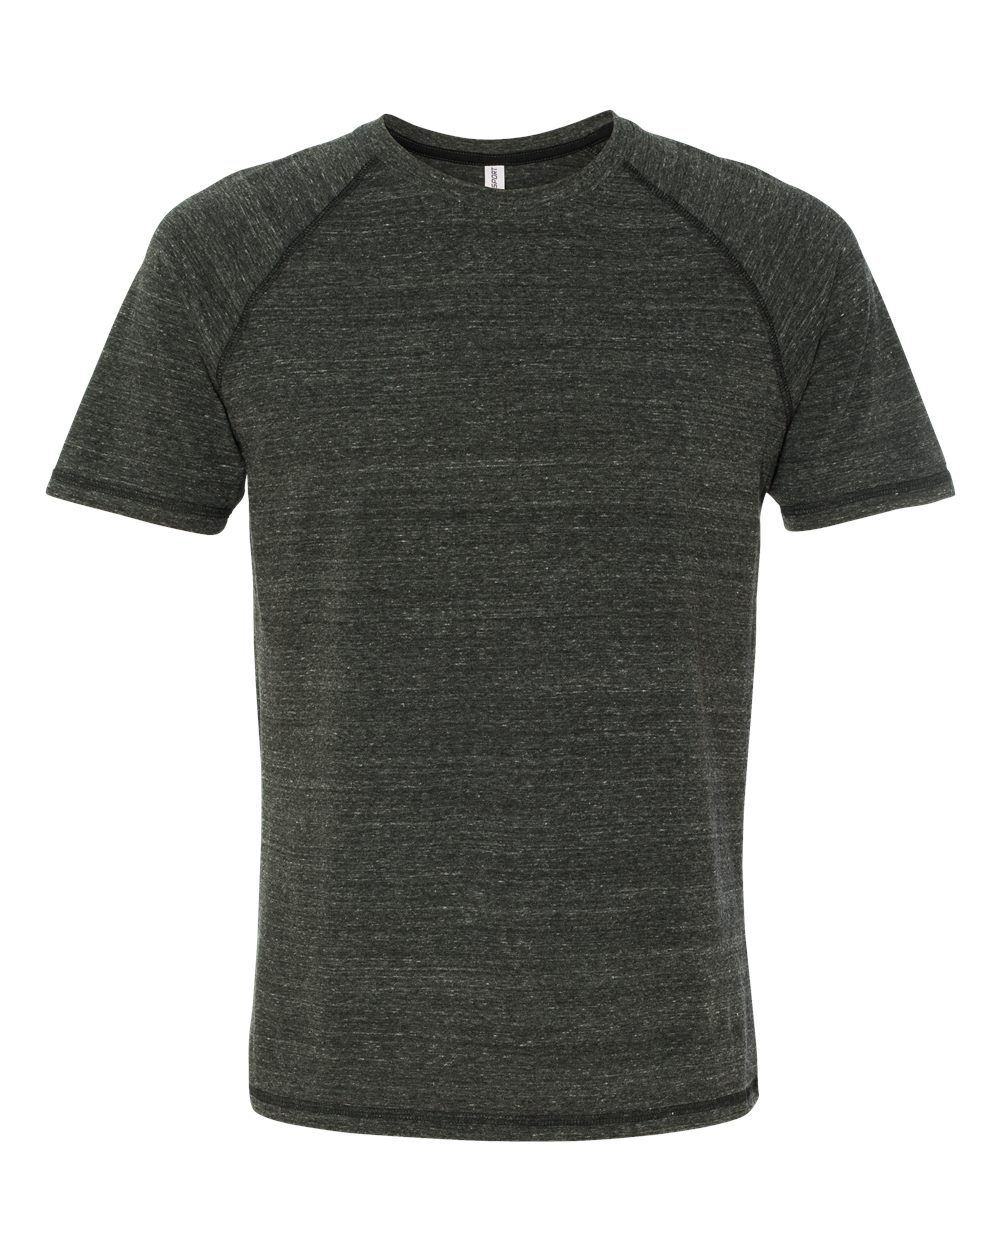 click to view Charcoal Heather Triblend